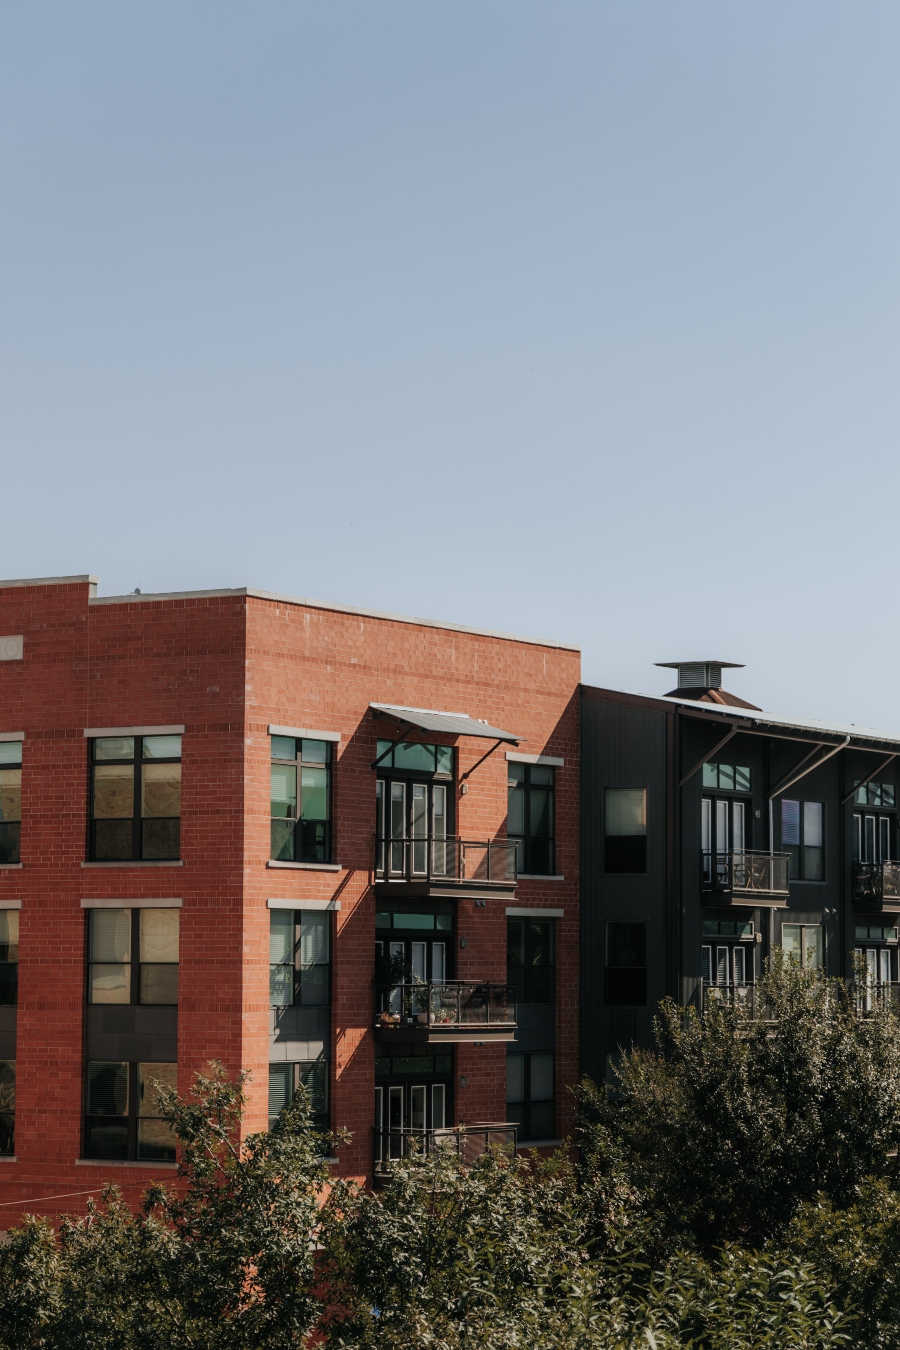 Why Buy a Multifamily Property?